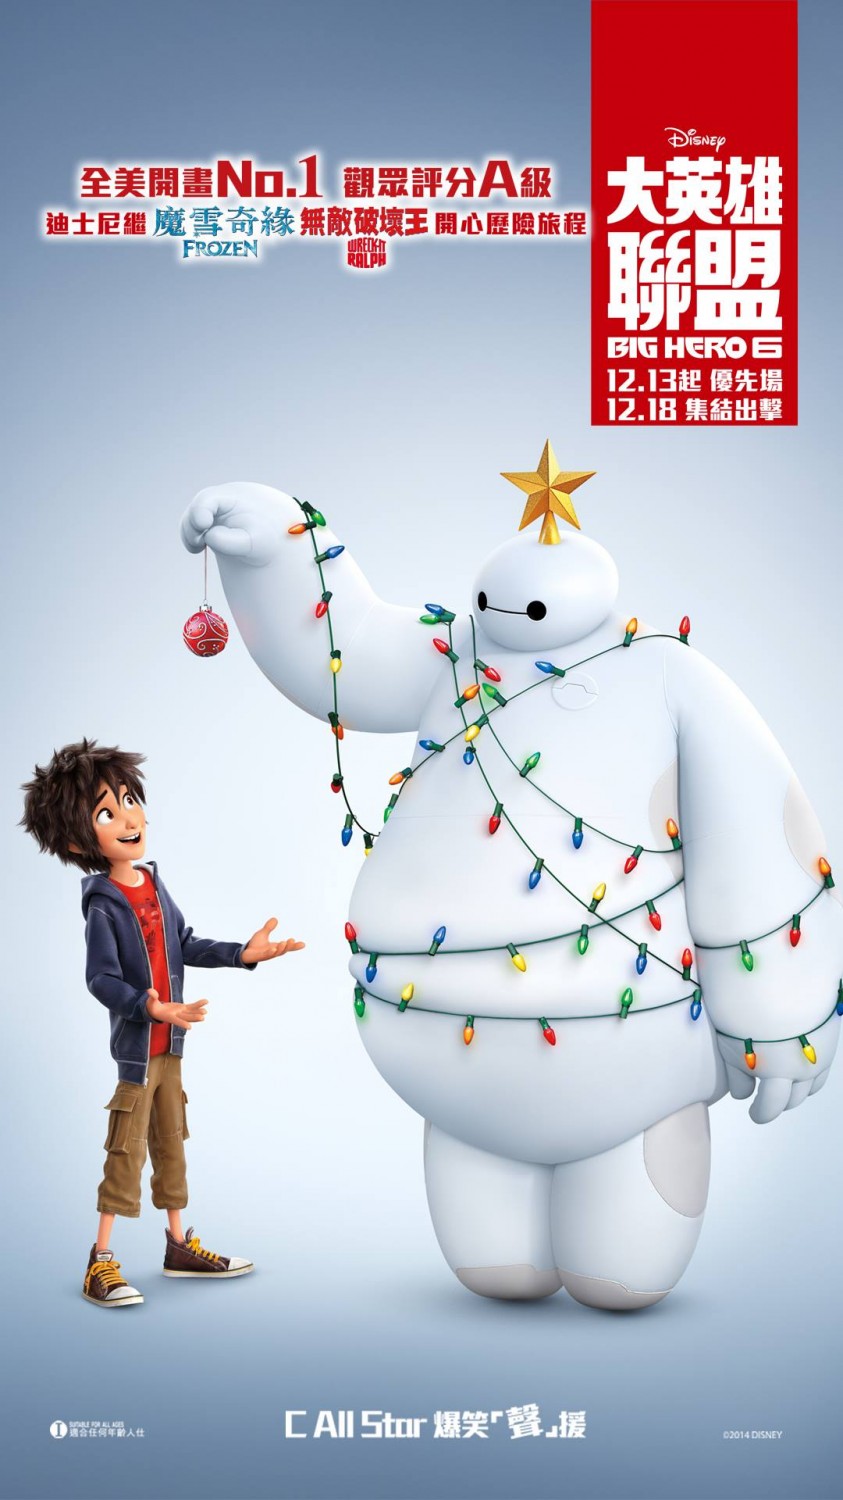 Extra Large Movie Poster Image for Big Hero 6 (#17 of 20)